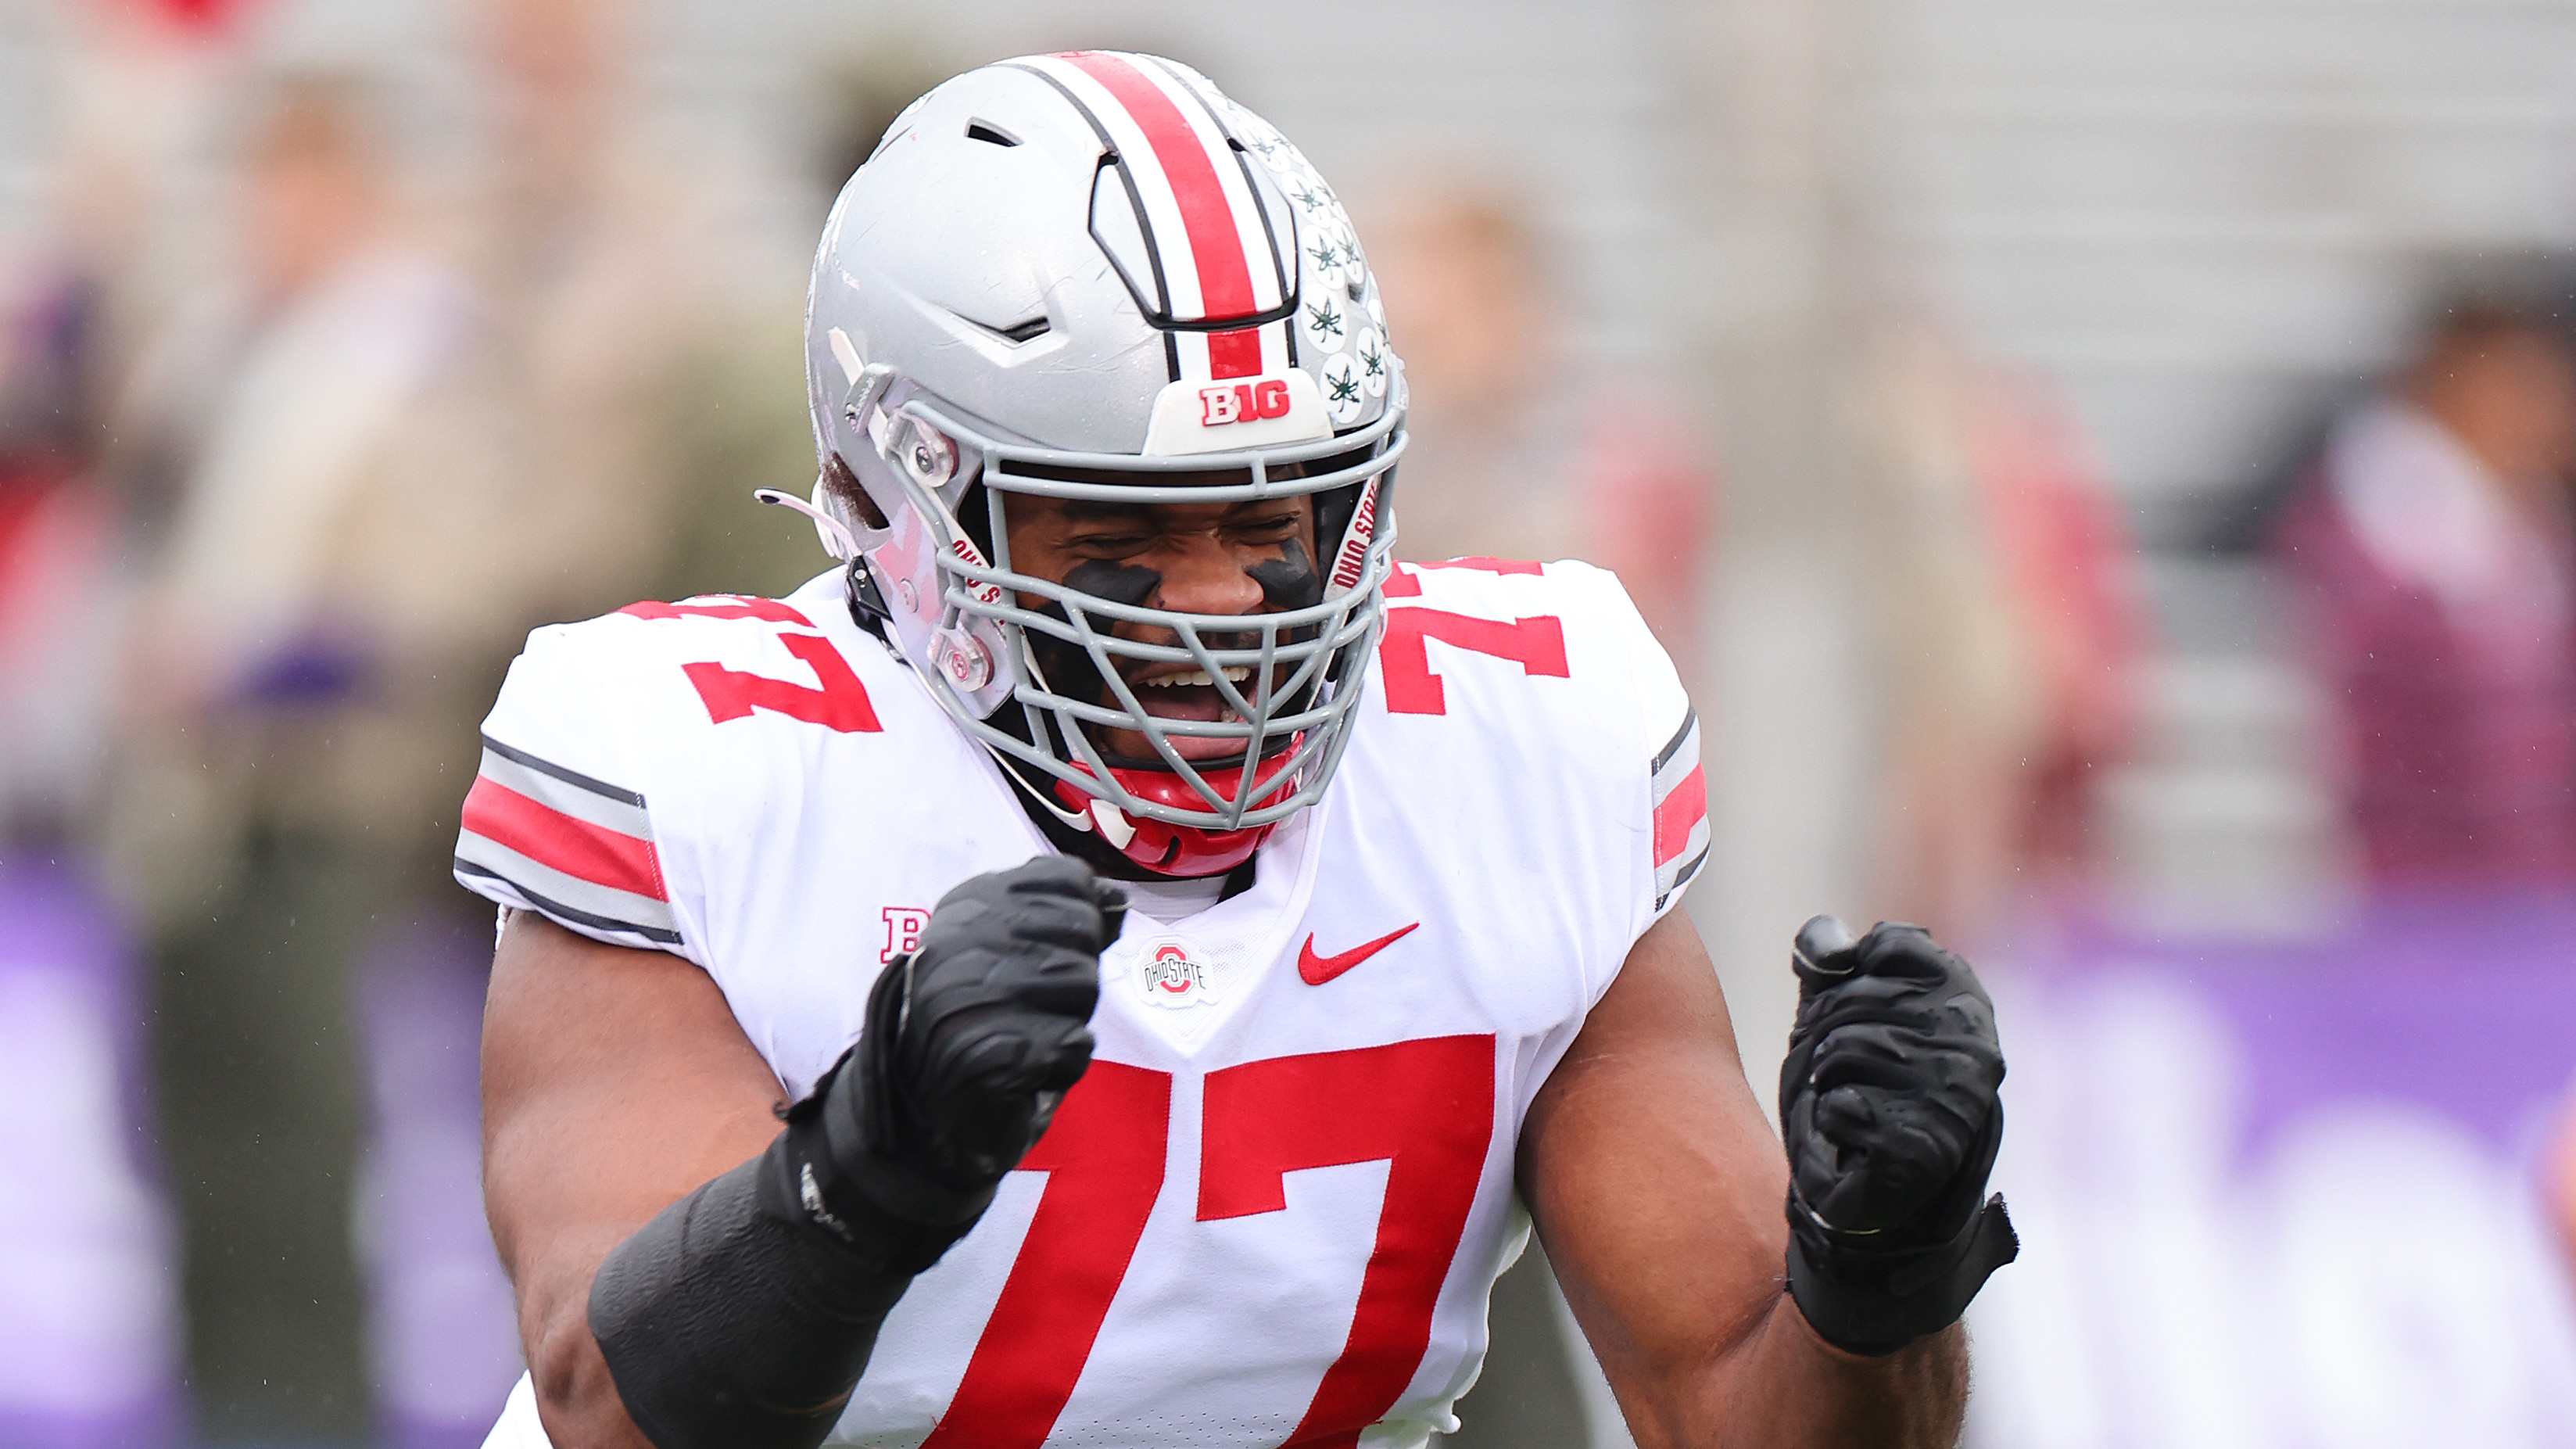 Paris Johnson Jr. #77 of the Ohio State Buckeyes in action against the Northwestern